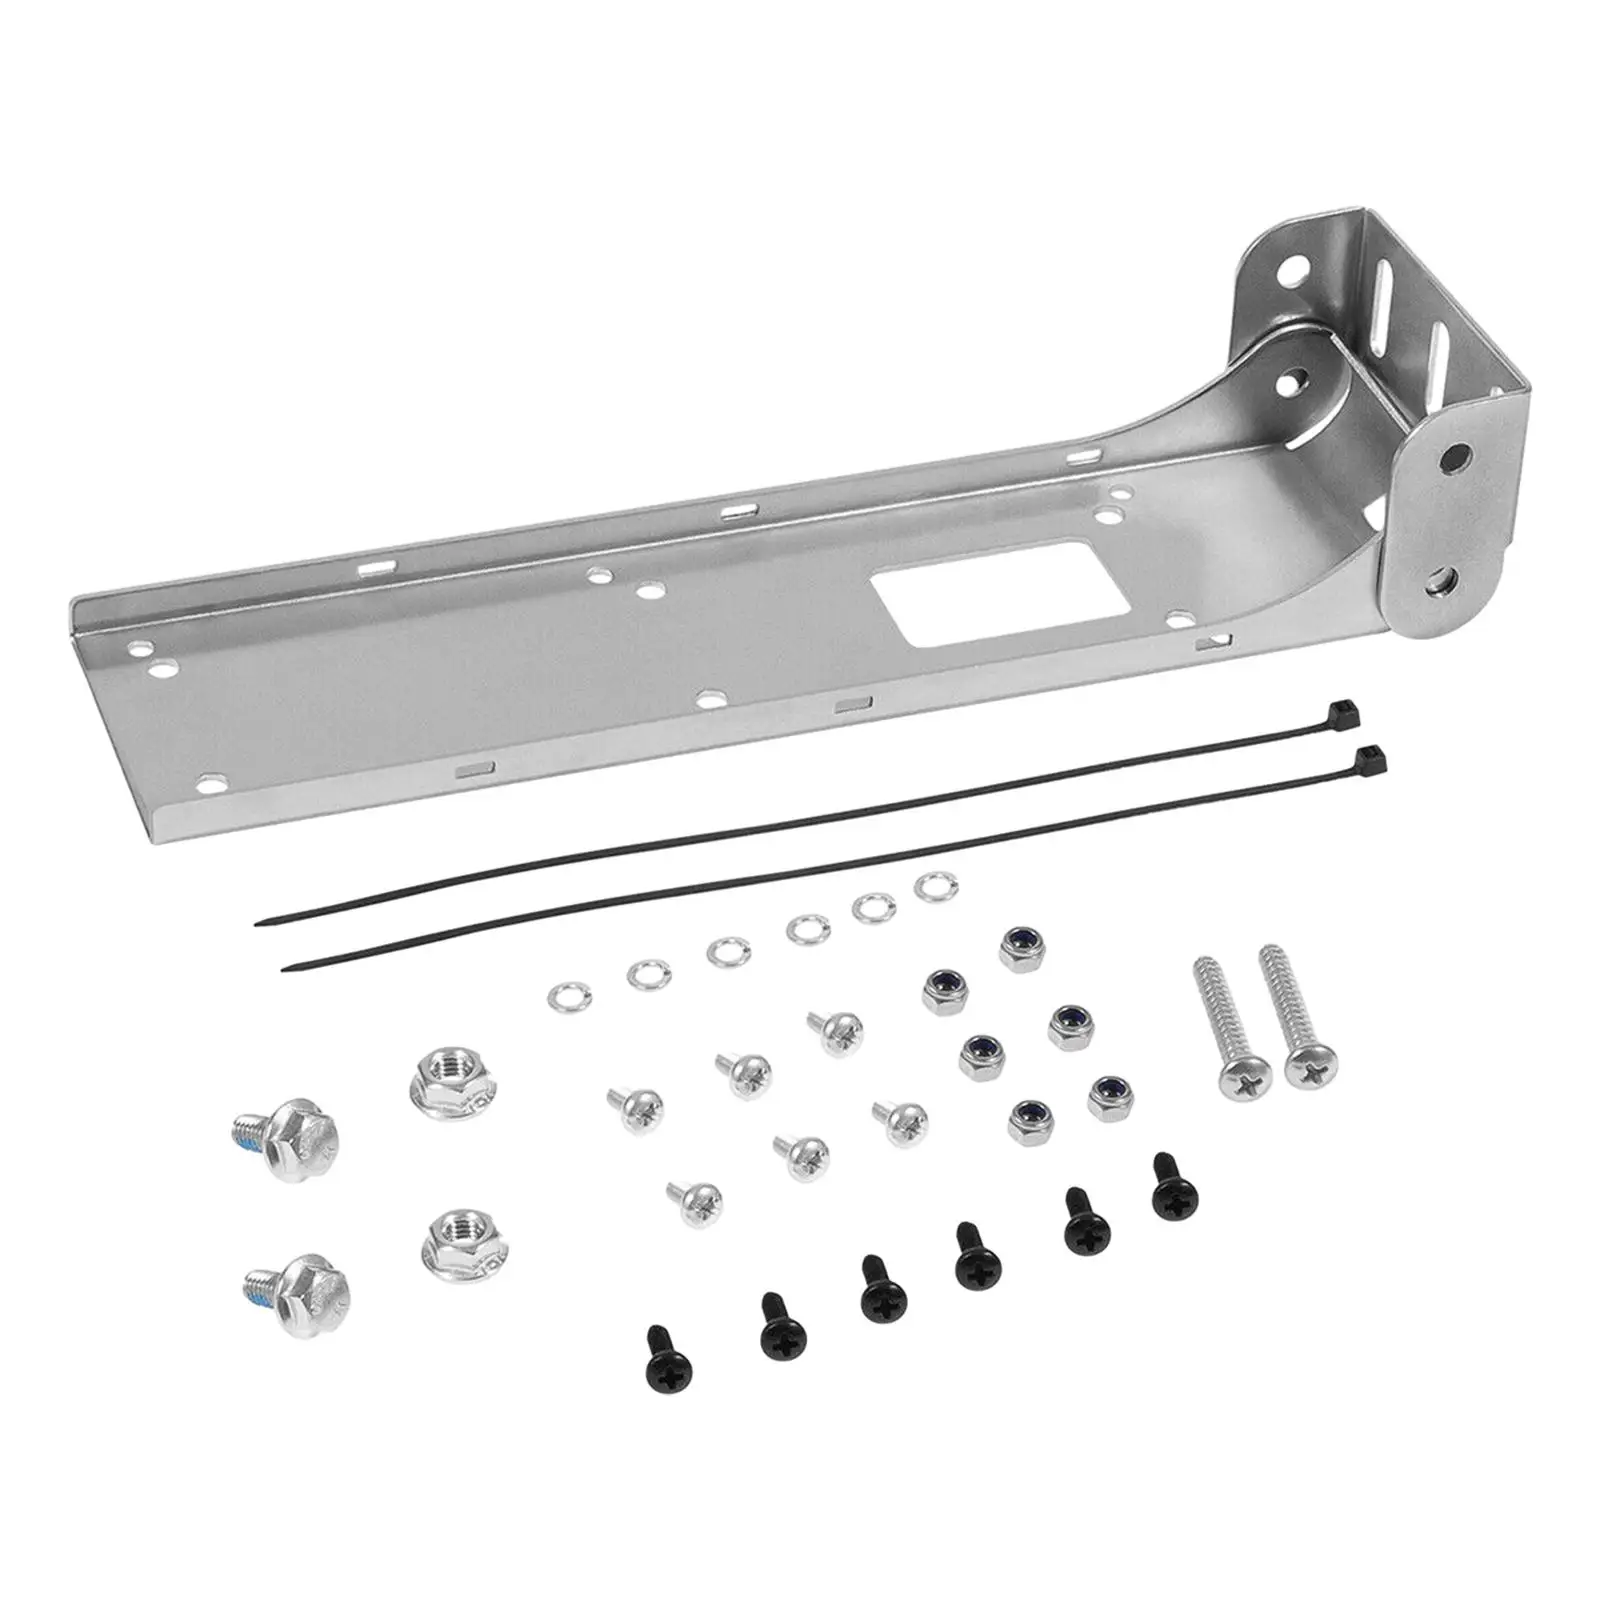 000-12603-001 High Performance Accessories Replaces Durable Premium Transom Mount Bracket Stainless Steel for StructureScan